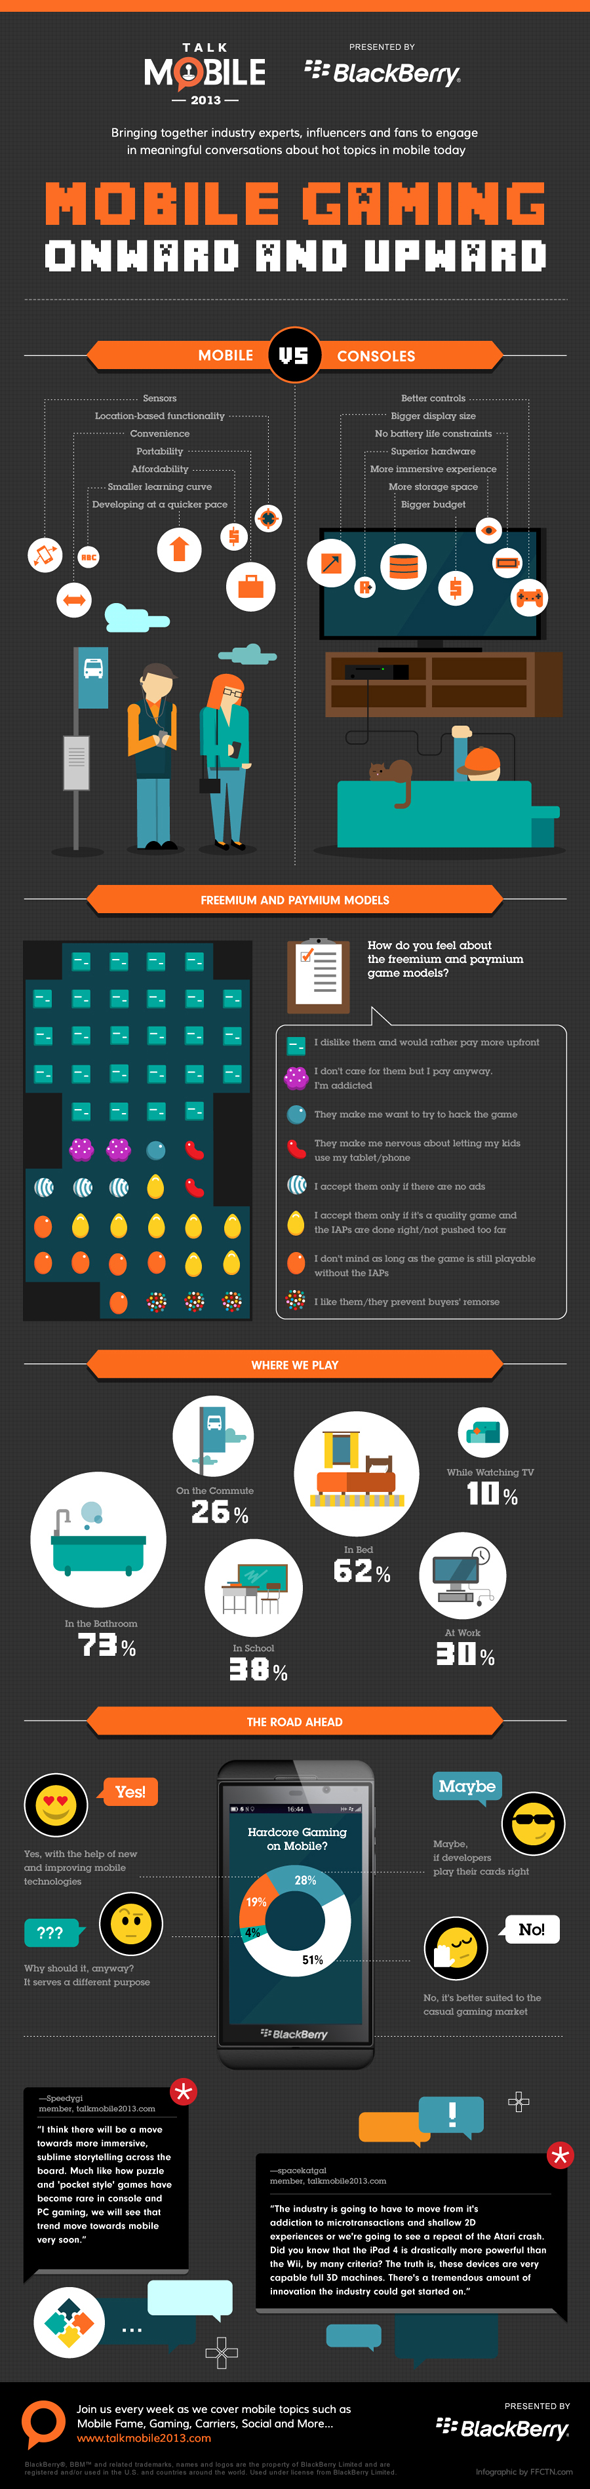 Mobile Gaming infographic